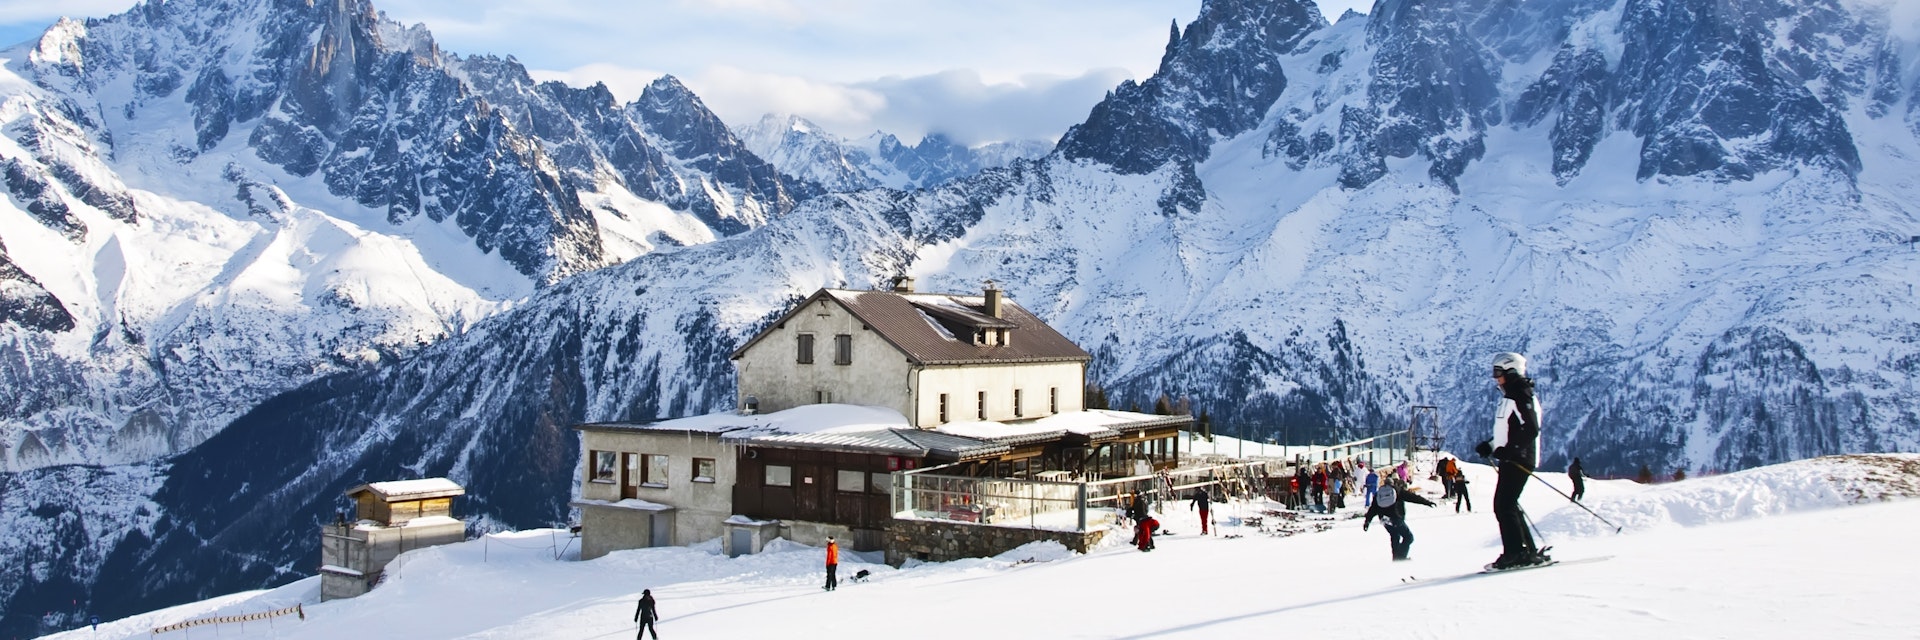 The winter view on the montains and ski lift station in French Alps near Chamonix Mont-Blanc